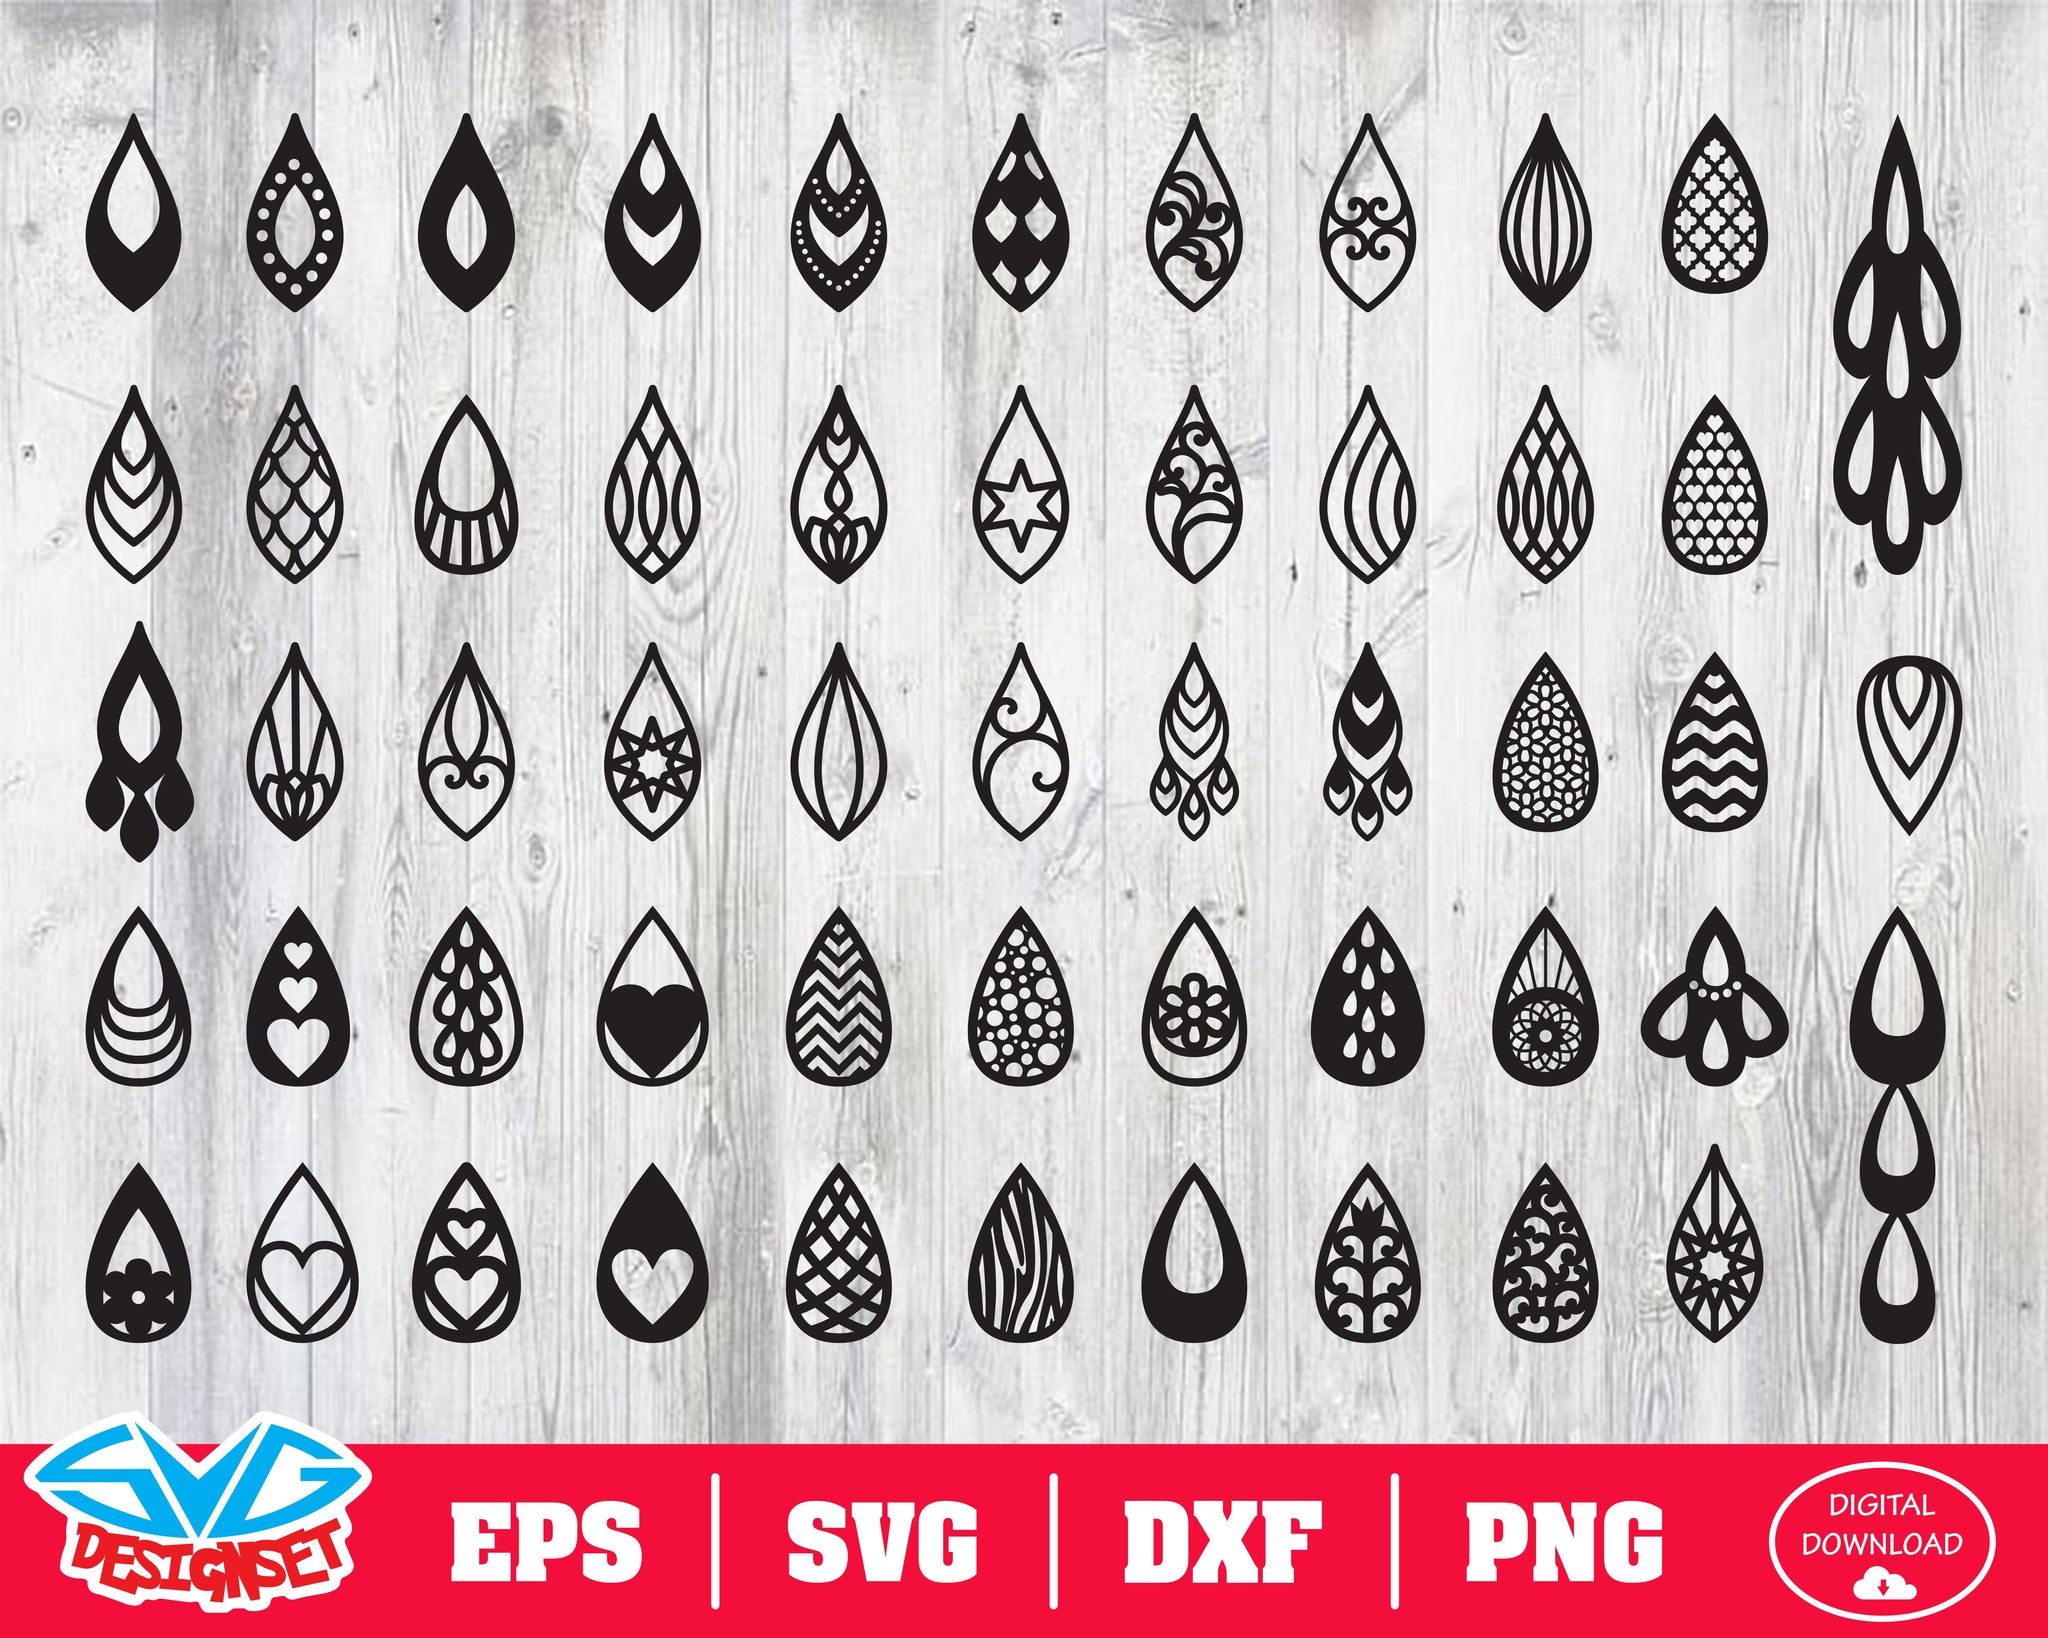 Teardrop Earrings Svg, Dxf, Eps, Png, Clipart, Silhouette and Cutfiles